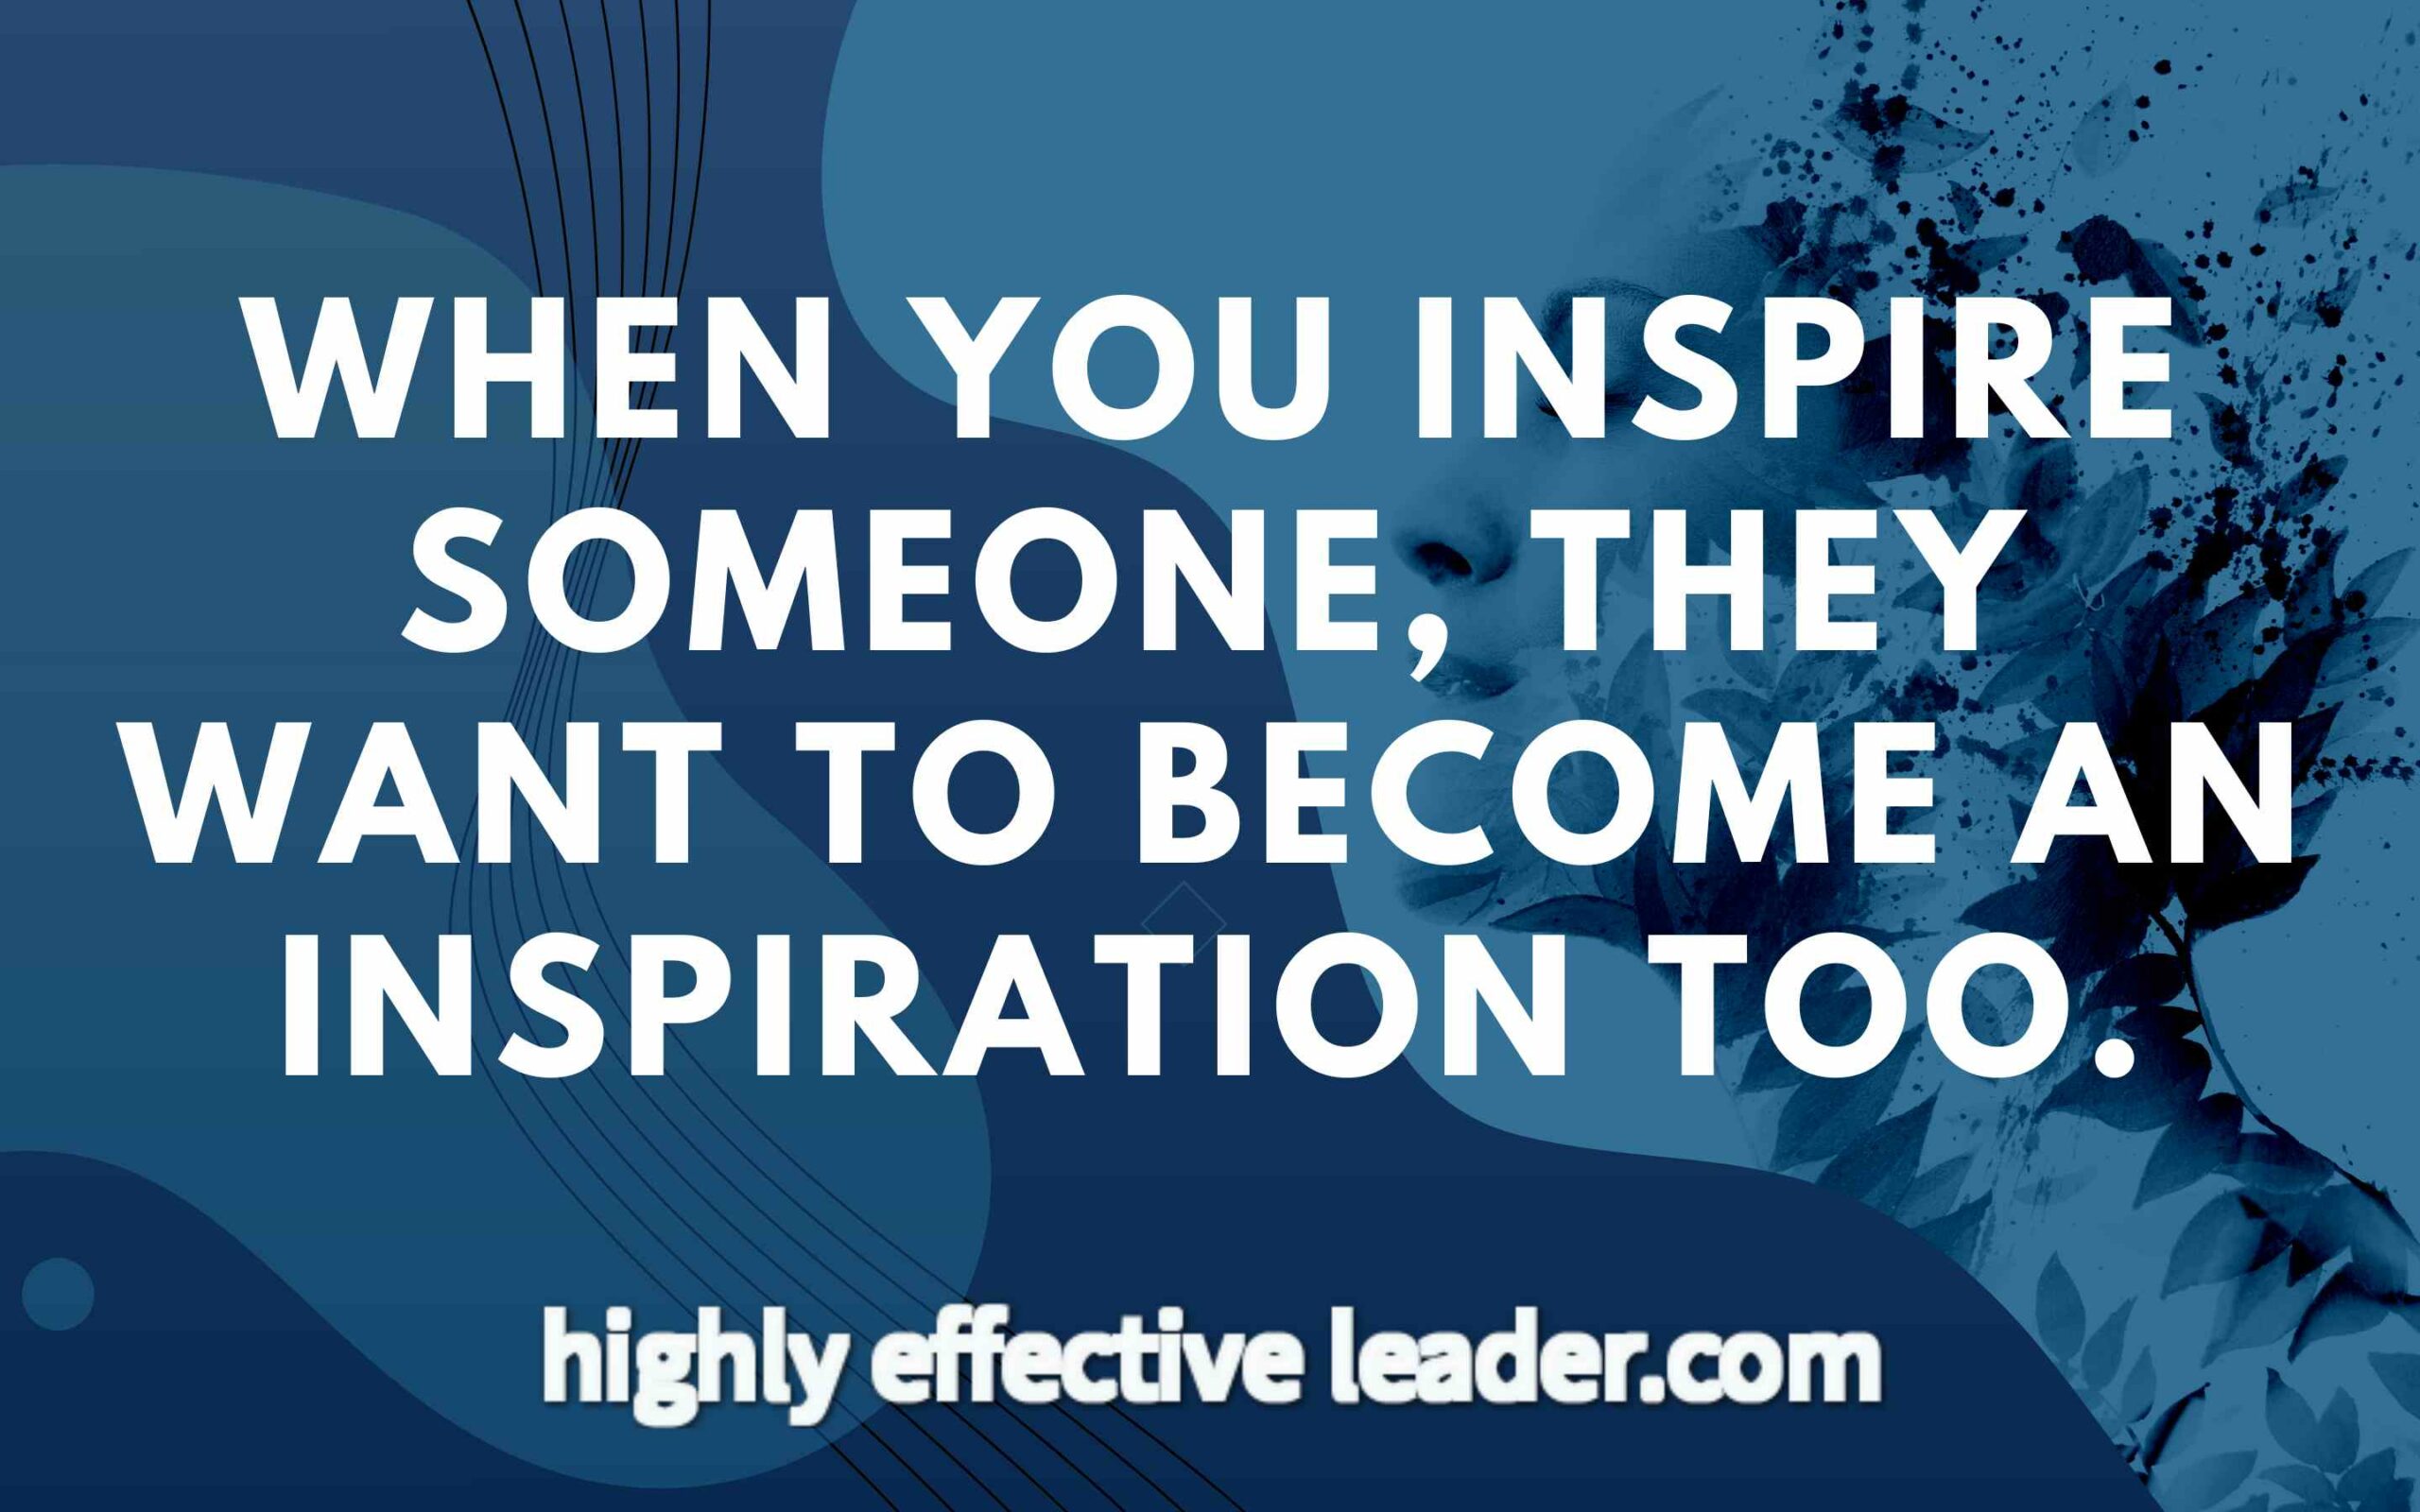 Inspire Your People